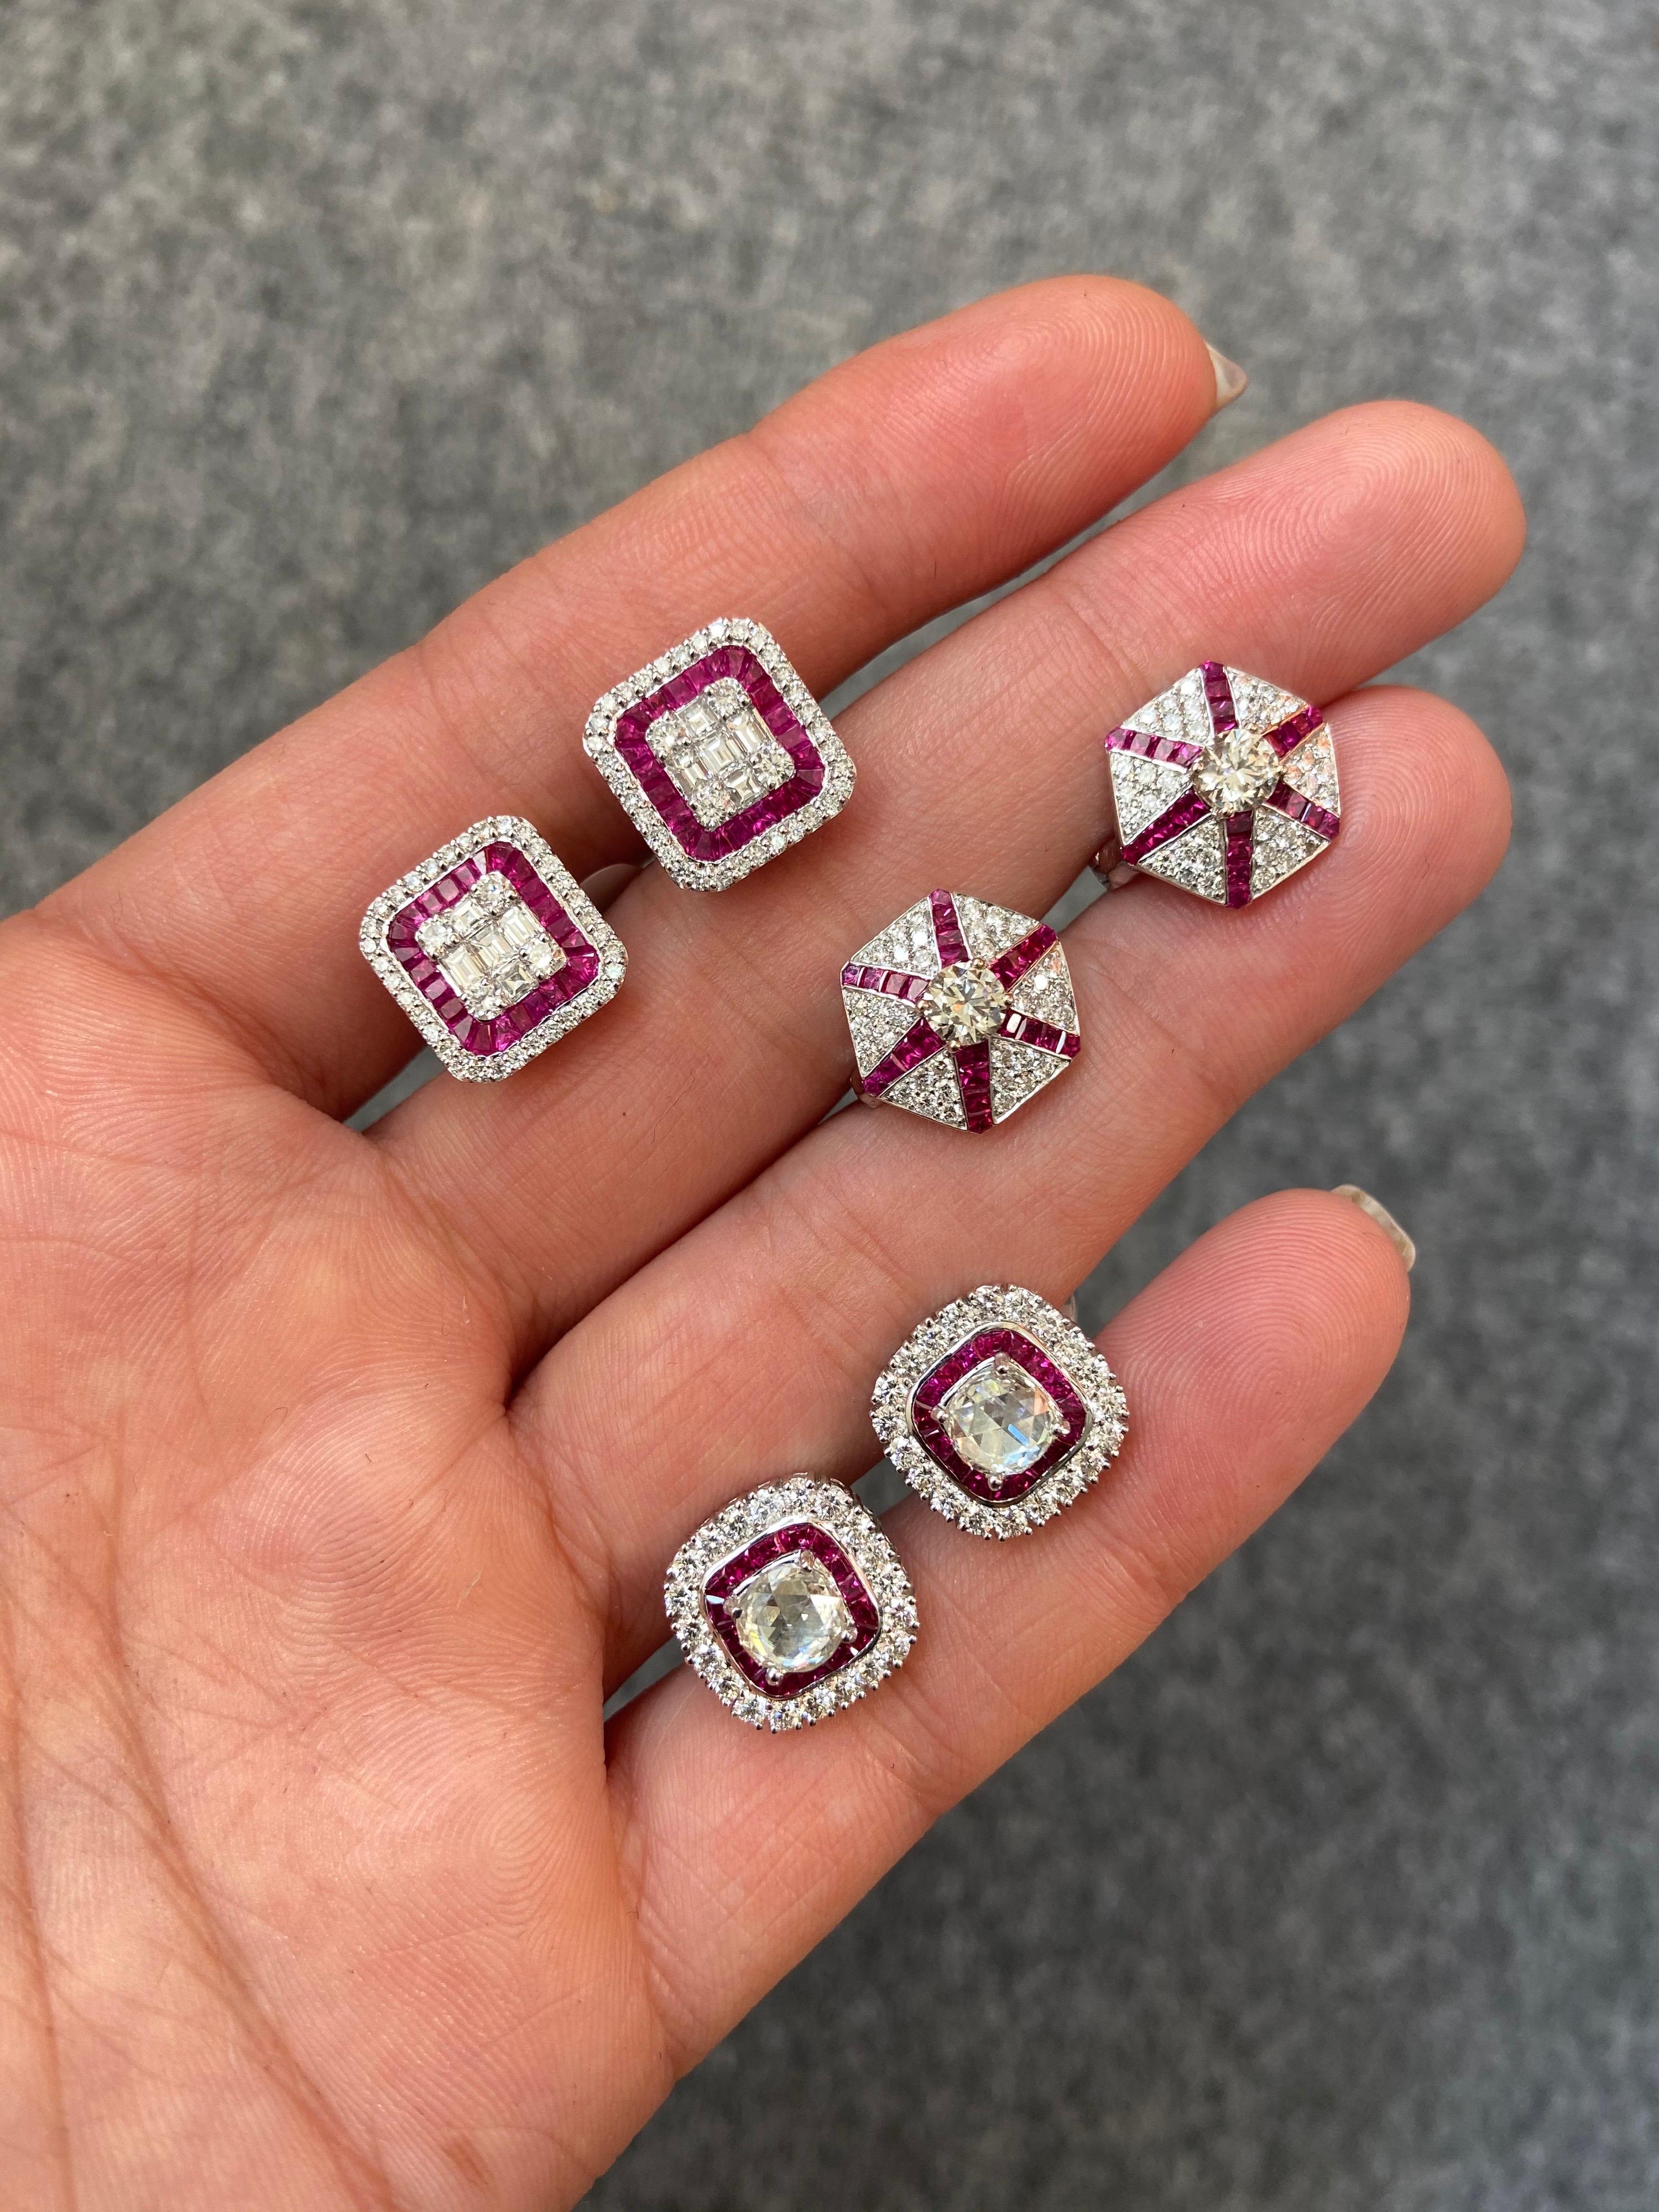 A classic pair of earrings, with illusion setting Diamonds (which look like 1 carat each) sorrounded by Ruby. A total of 1.10 carat VS quality, colourless, baguette and round Diamonds are used, and 2.71 carat Ruby, all set in solid 4.42 grams of 18K